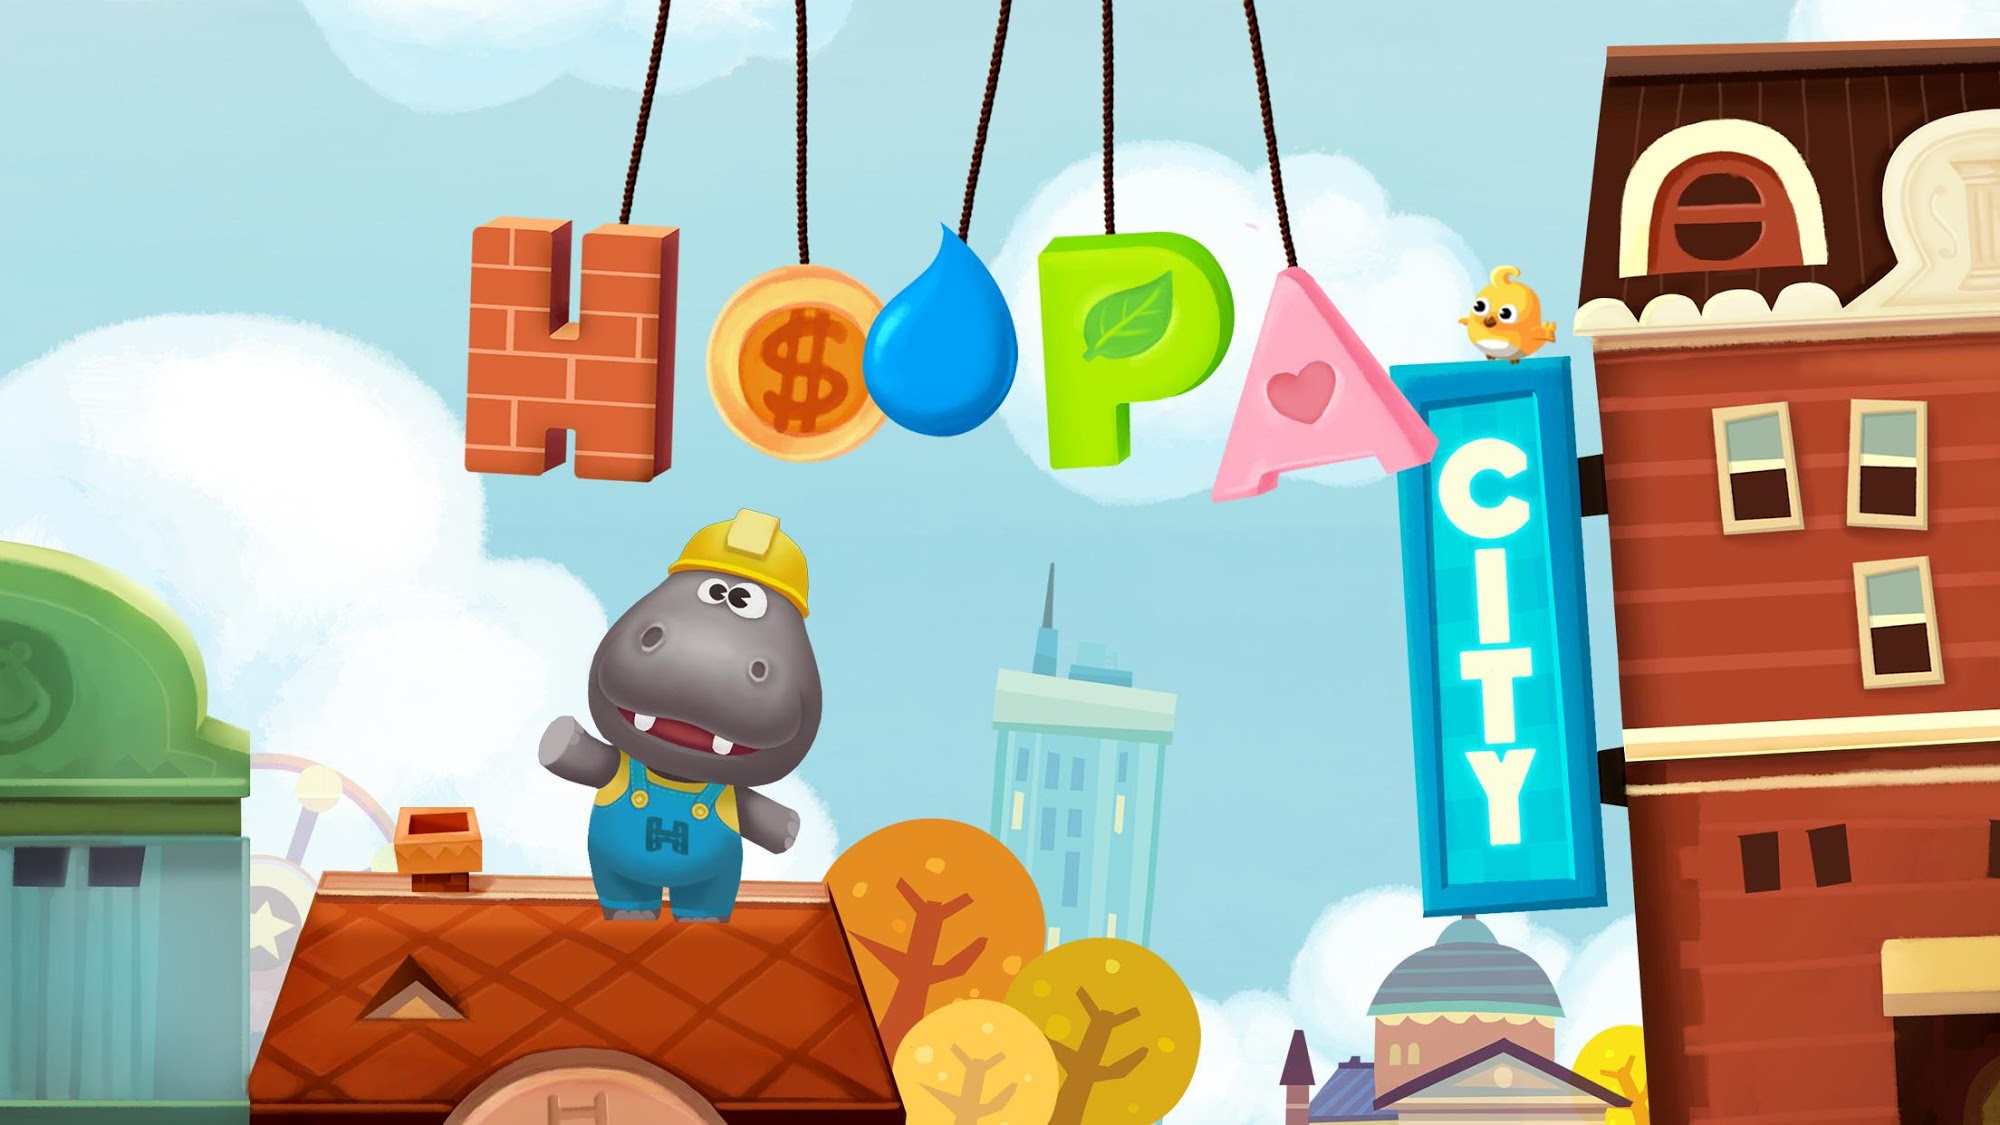 Hoopa City for Android